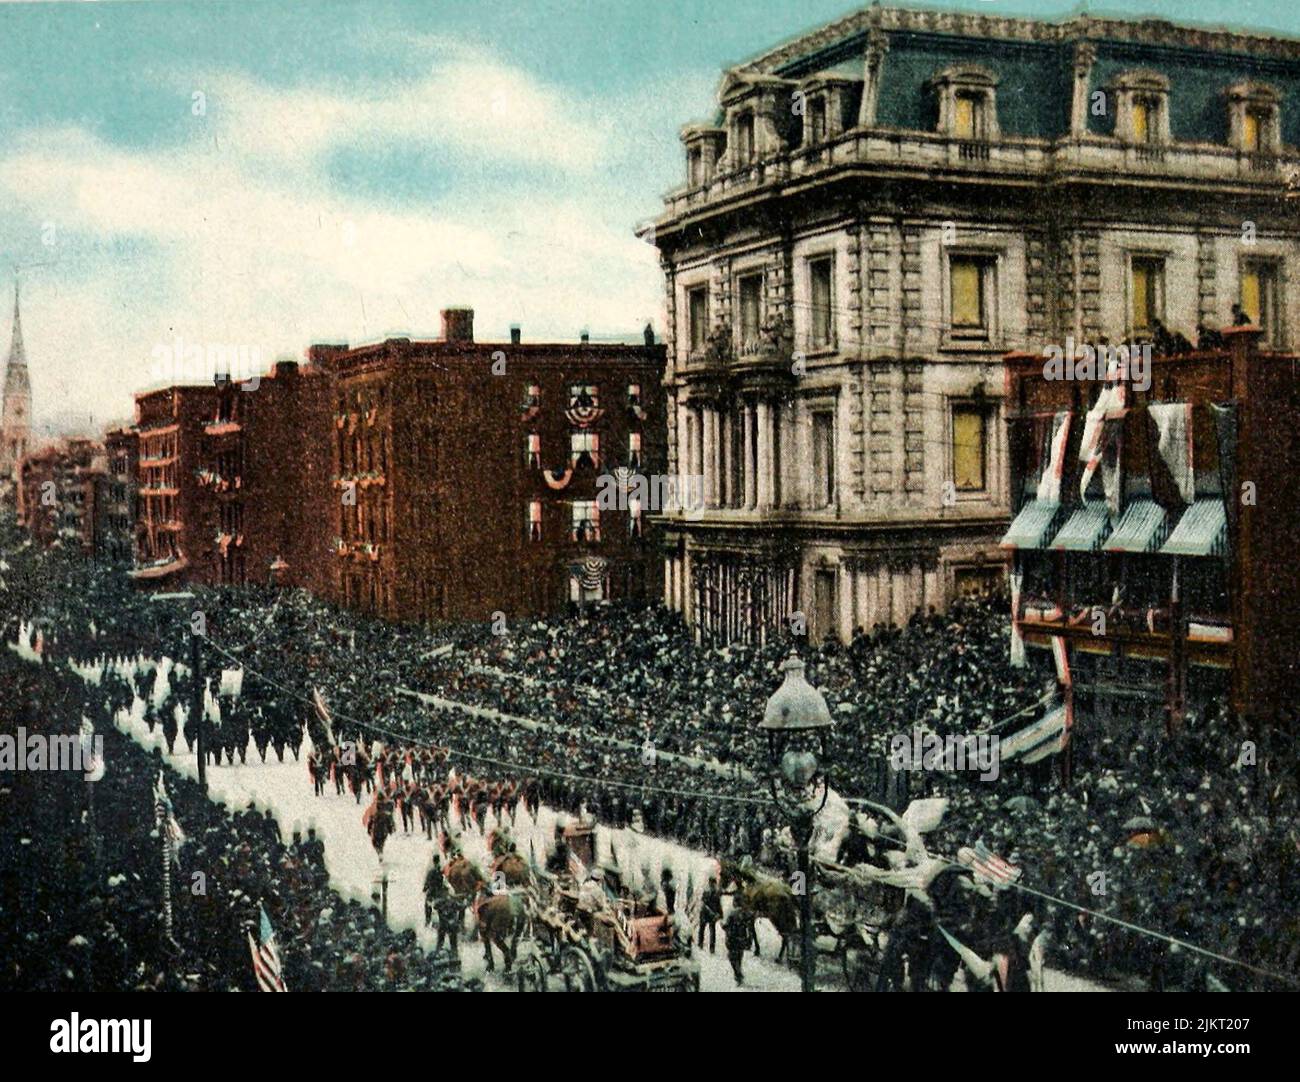 Centennial Celebration of Evacuation Day, November 25, 1883.  A view of Fifthe Avenue, south from Thirty-Fifth Street, showing the old Astor Residences, later covered by the Waldorf Astoria Hotel Stock Photo